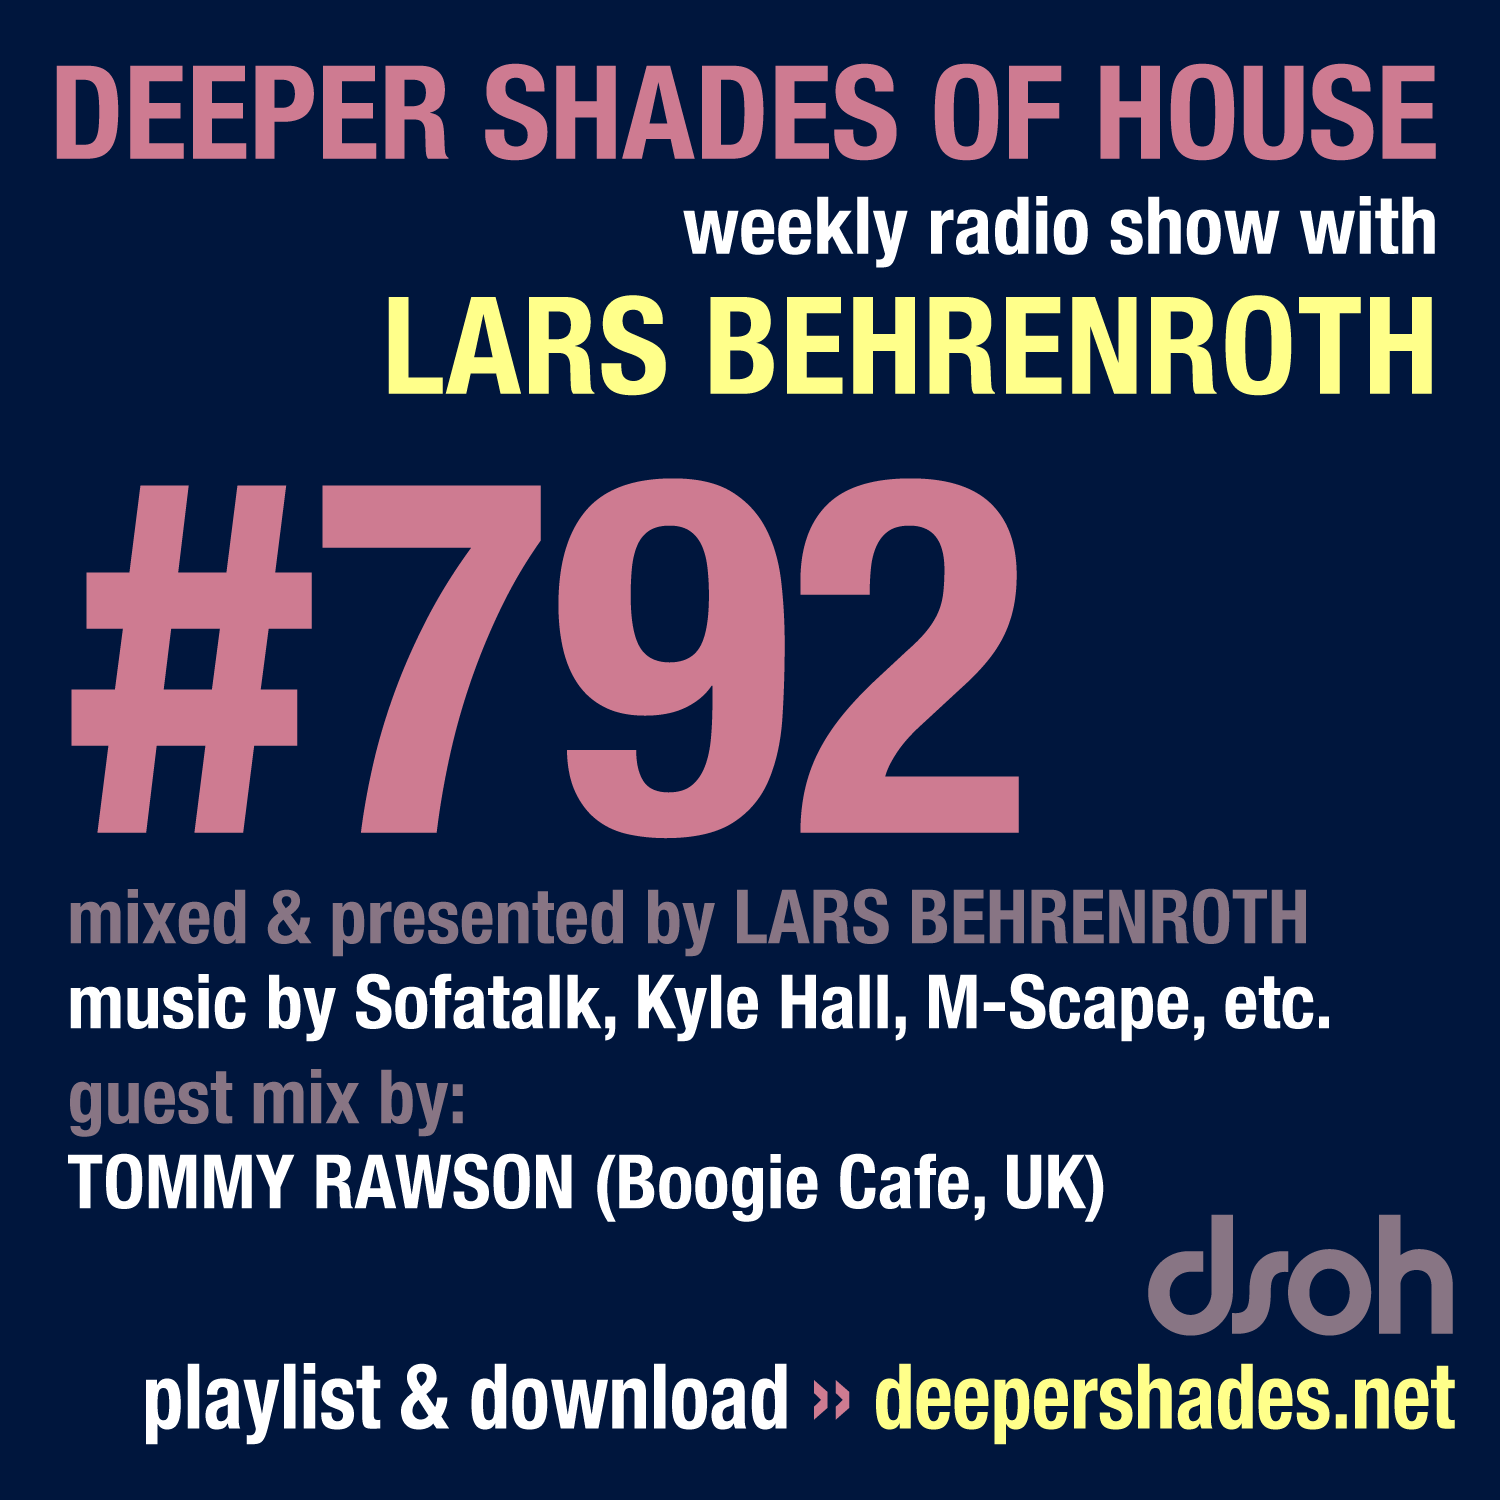 Deeper Shades Of House 792